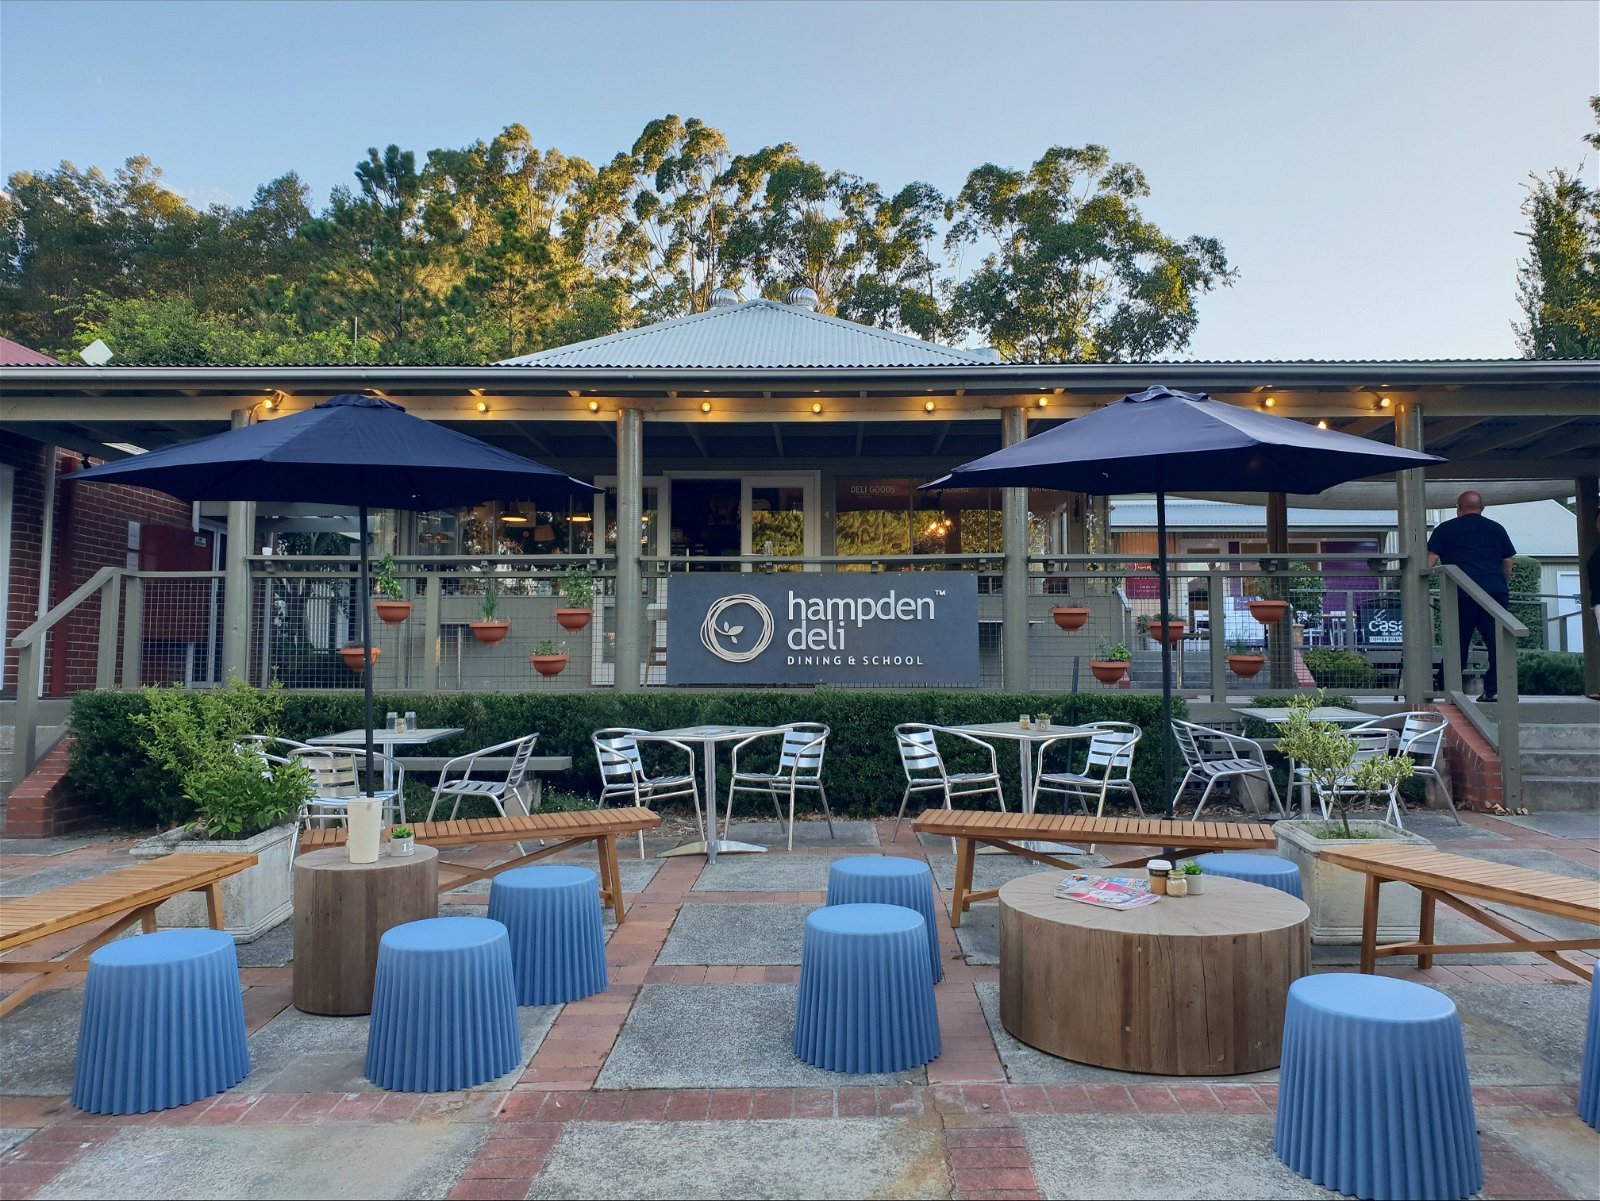 Hampden Deli Dining and School - Broome Tourism